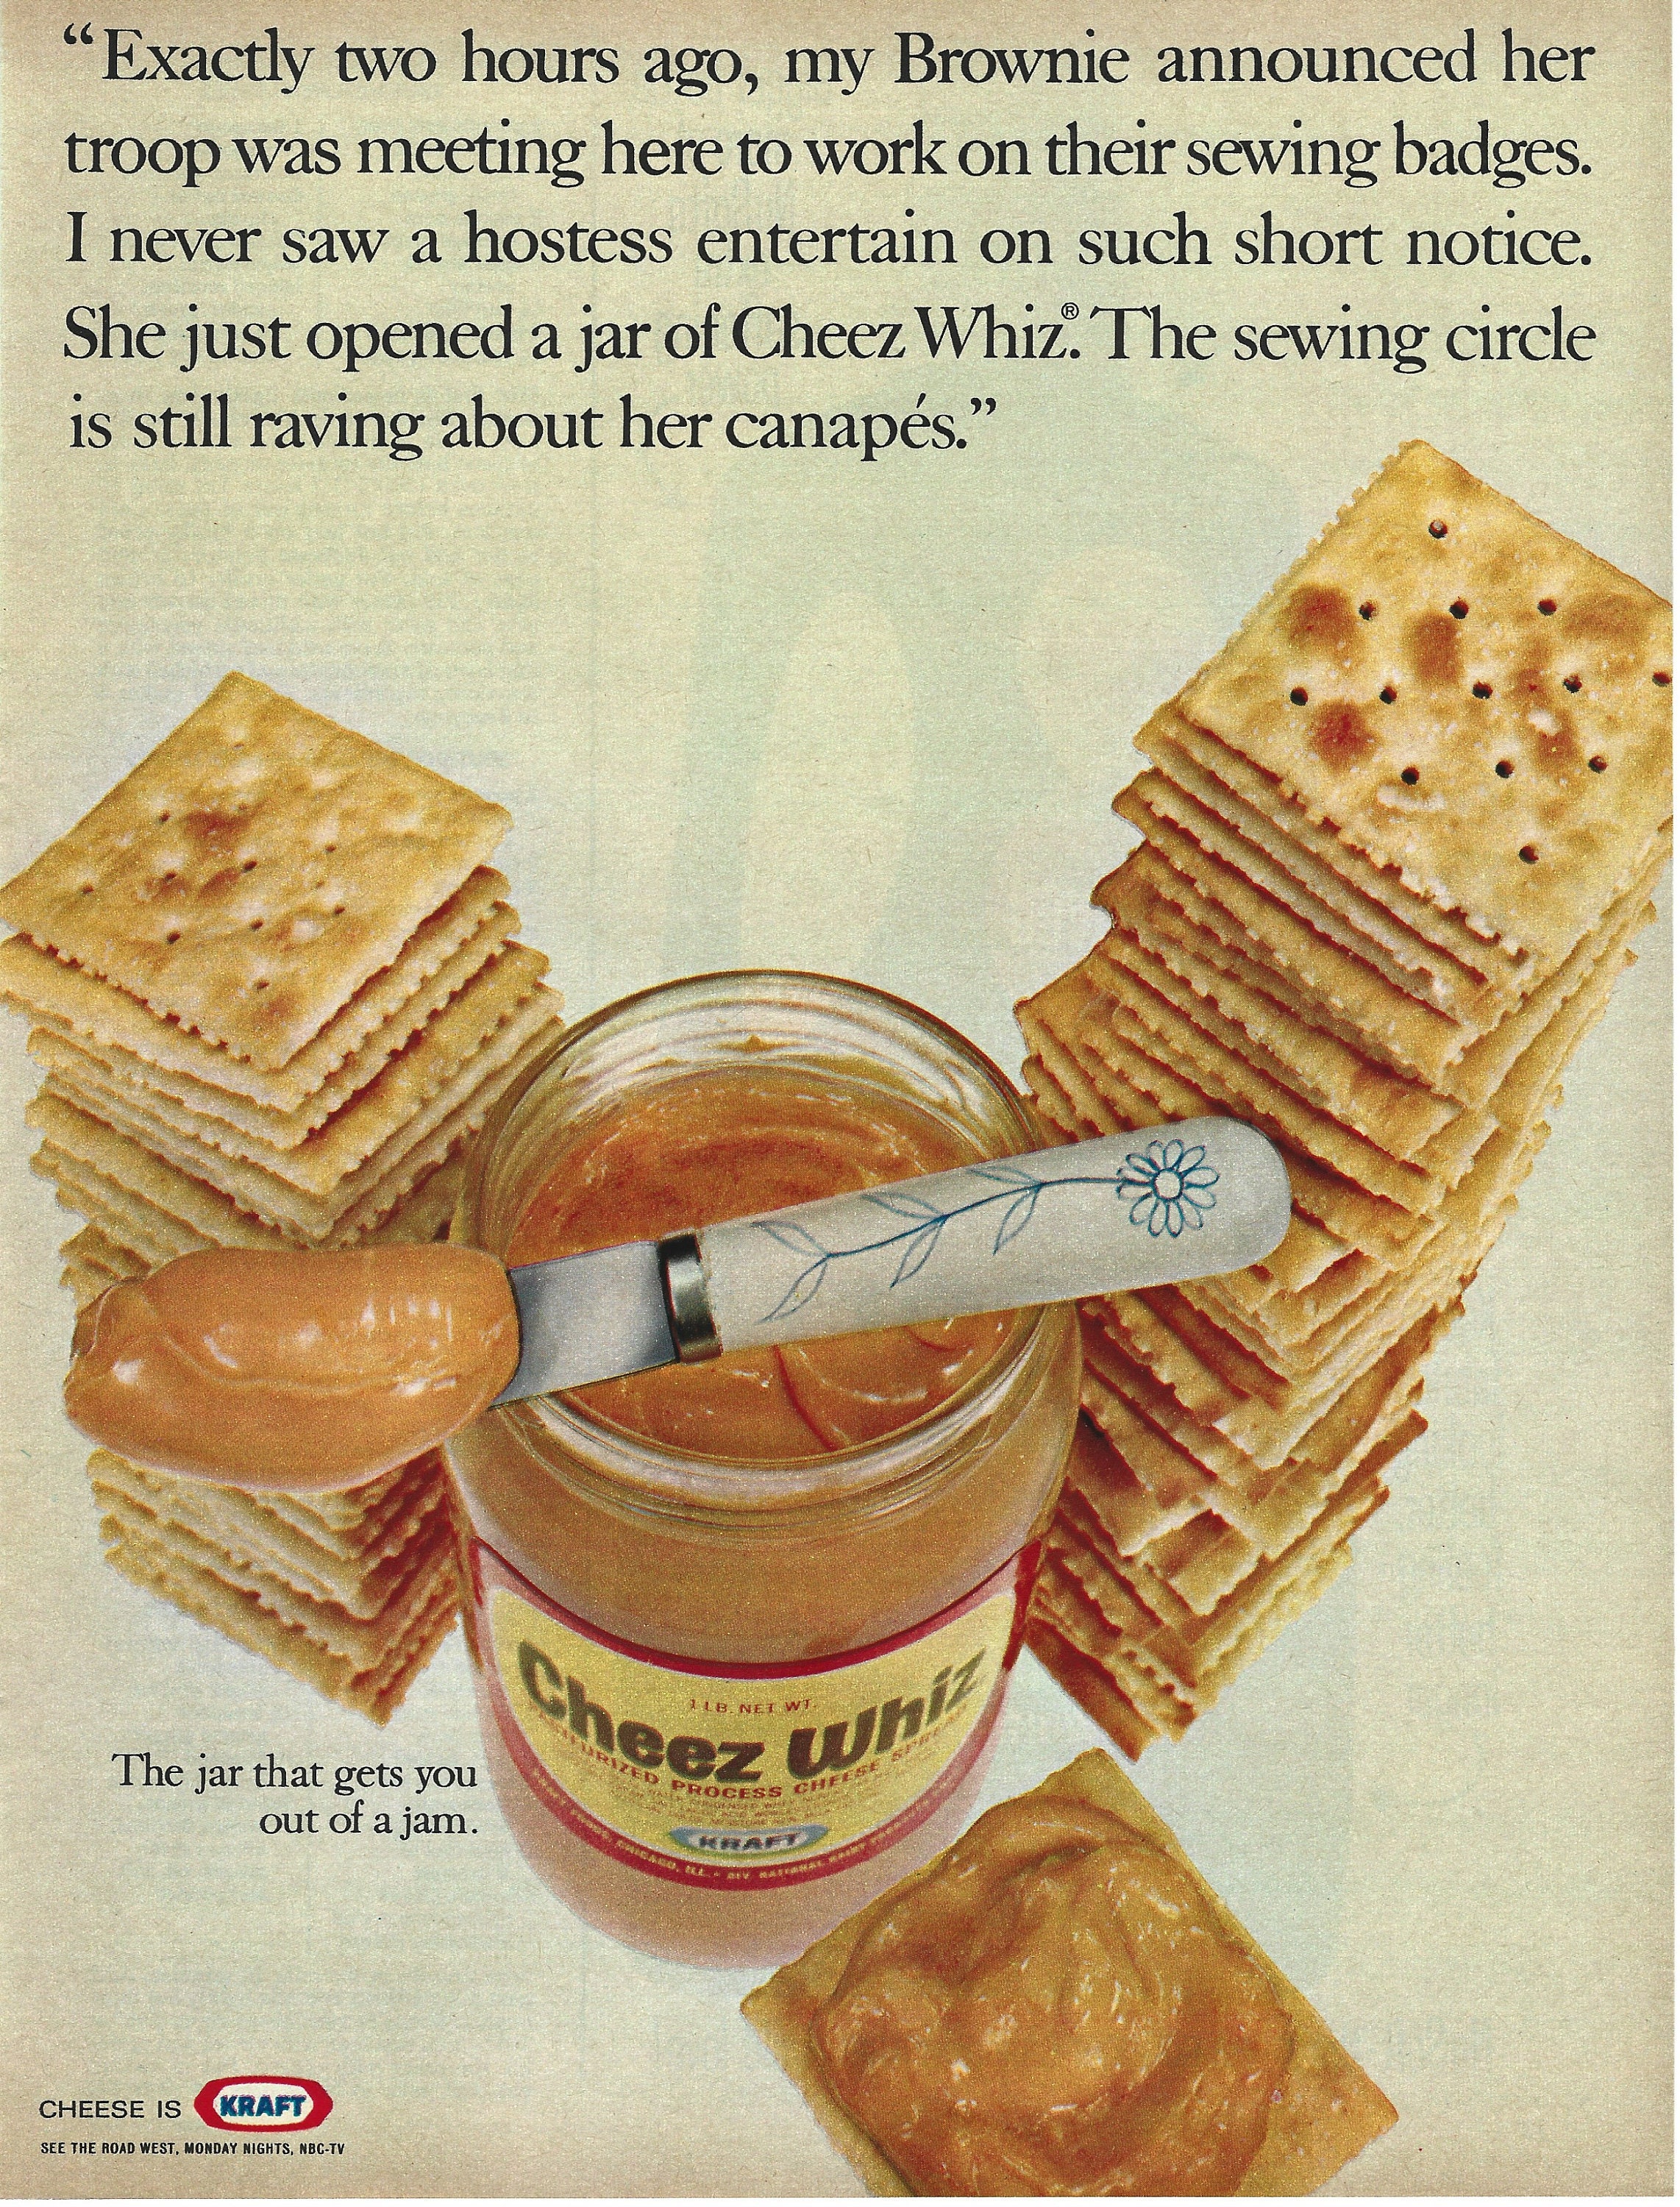 The Not-So-American History of Cheez Whiz